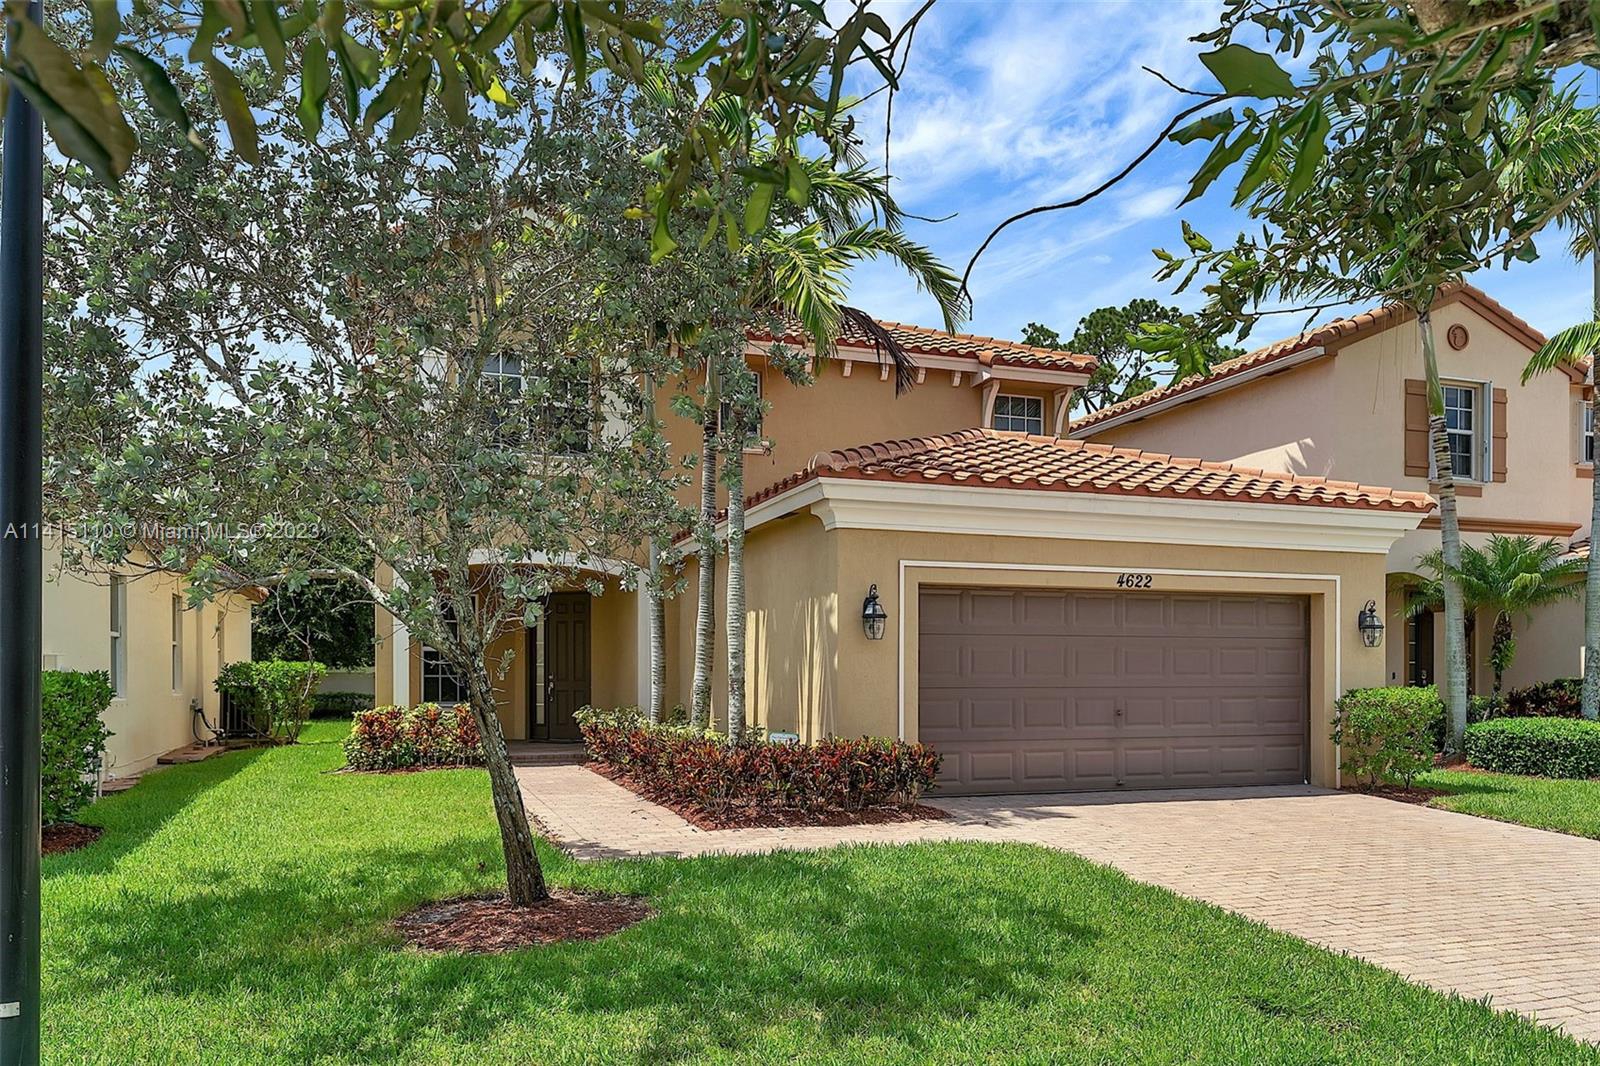 4622 Capital Dr, Lake Worth, Palm Beach County, Florida - 5 Bedrooms  
3 Bathrooms - 